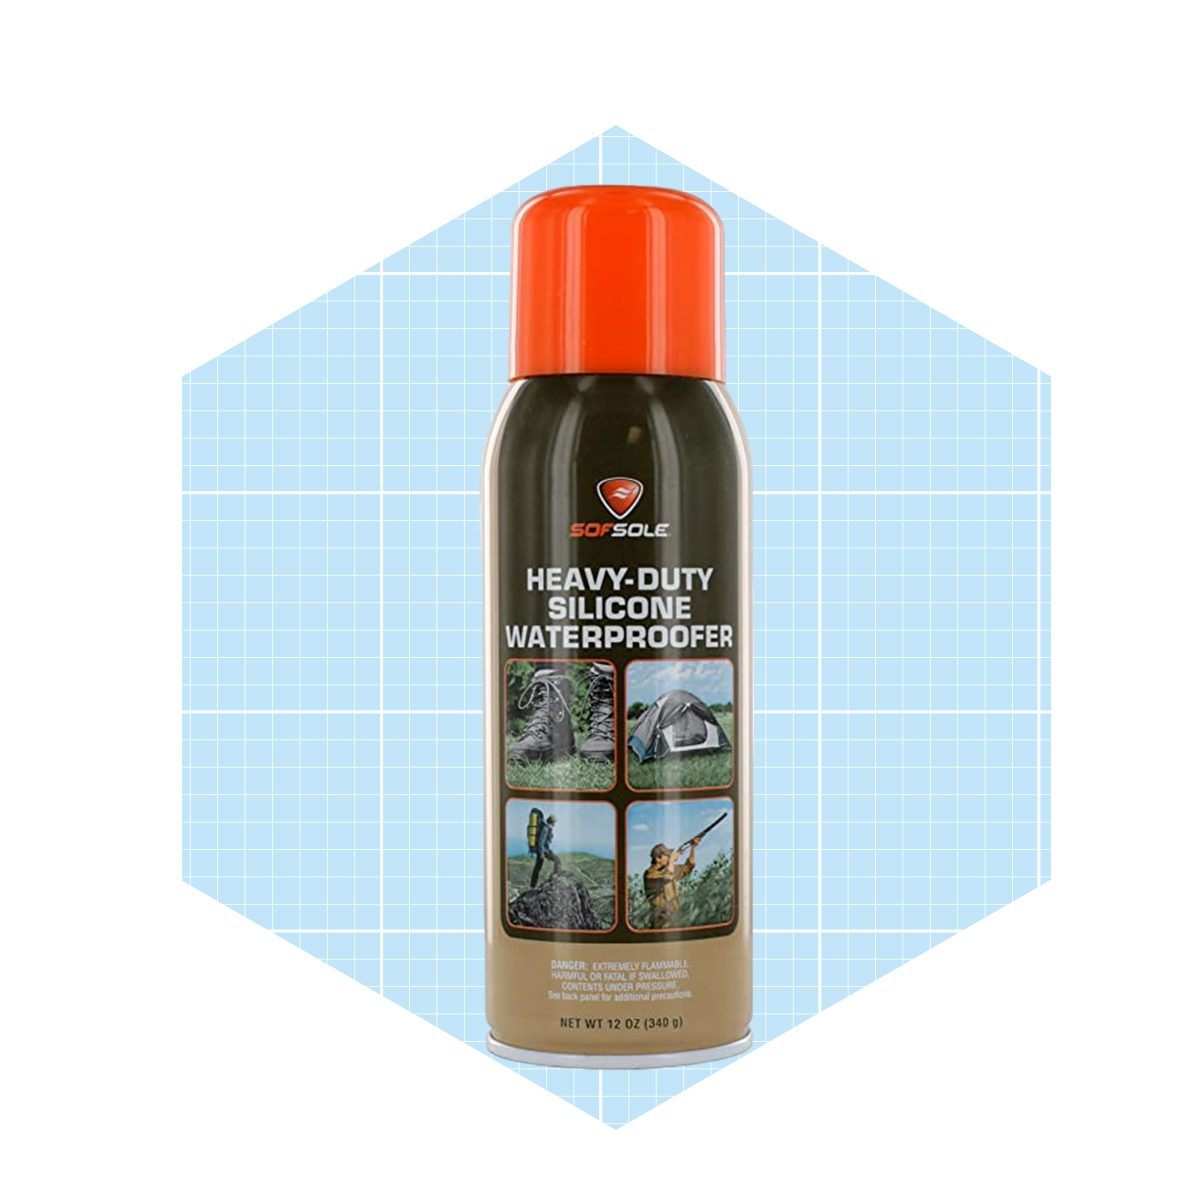 Waterproof Spray / Home Aerosol For Keeping Items Water Repellent And Stain  Resistant